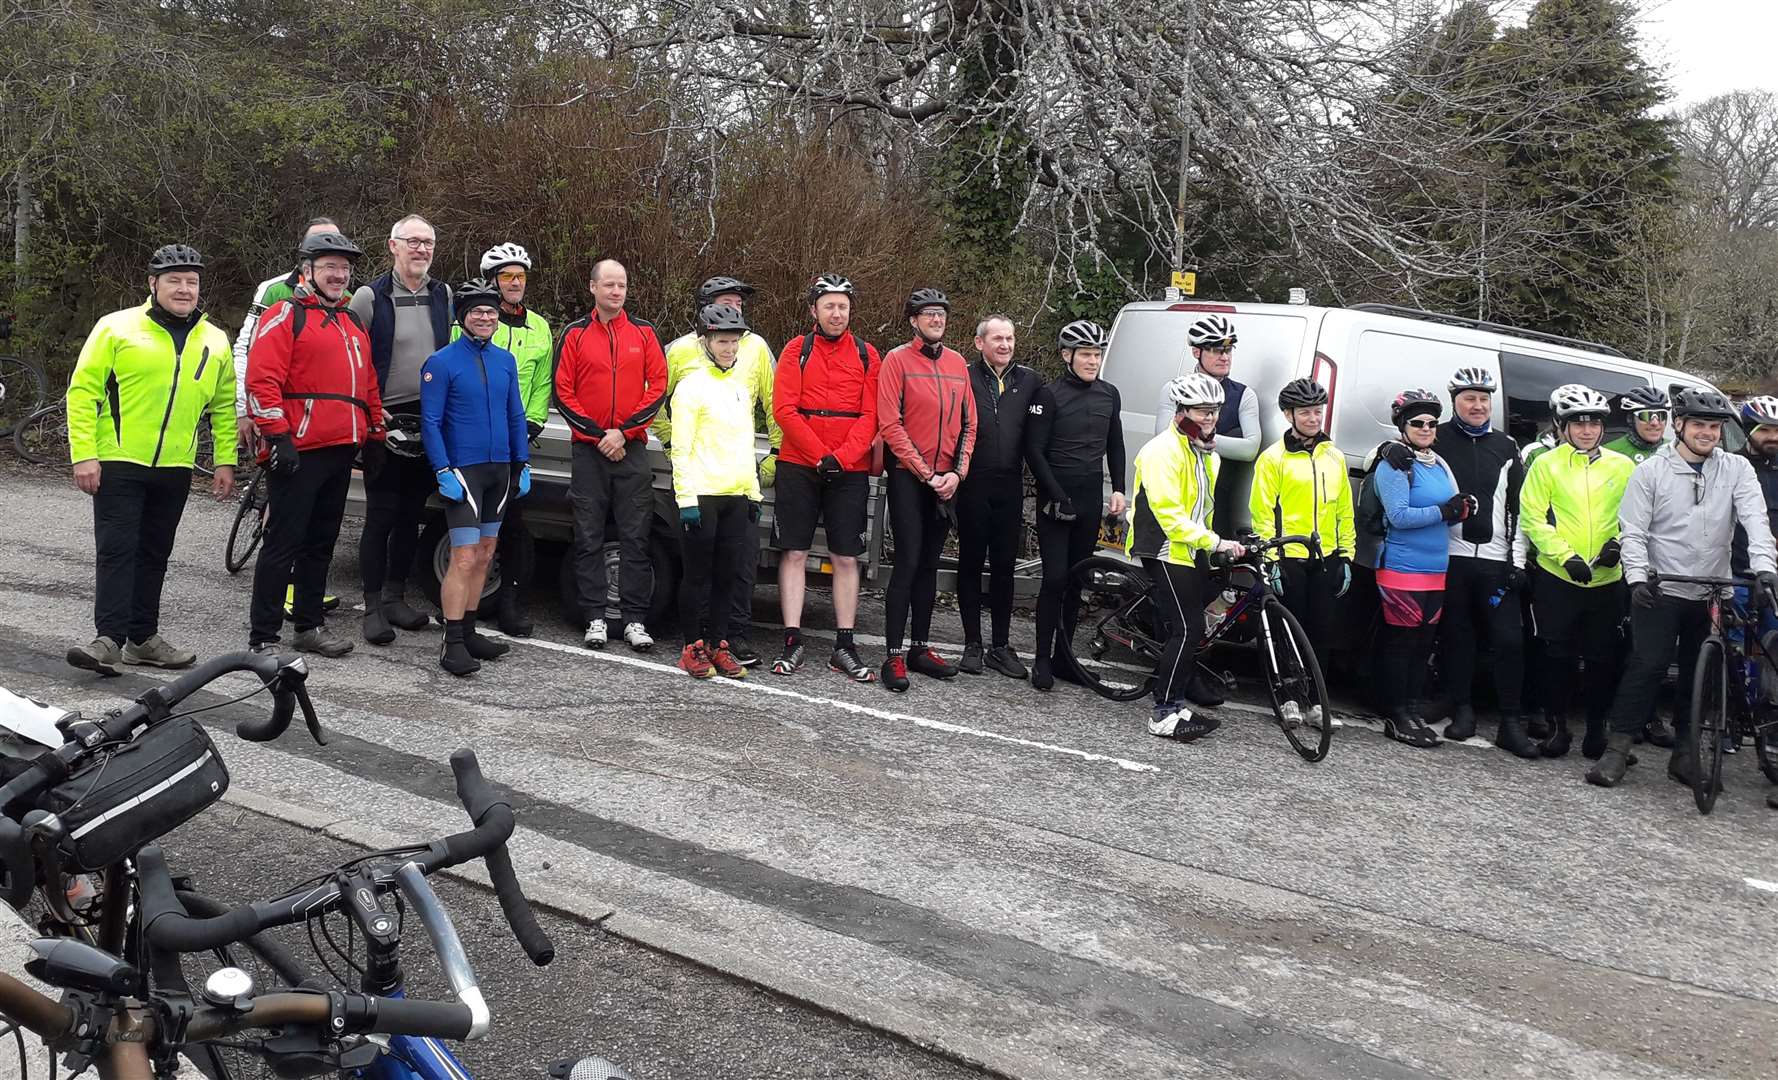 The cyclists before leaving Lairg. Two of those who travelled the furthest for the event were Gary Livesey from Oldham, pictured on the far left in the yellow fluorescent jacket, and next to him in the red jacket, Dave Lloyd from Rochdale.